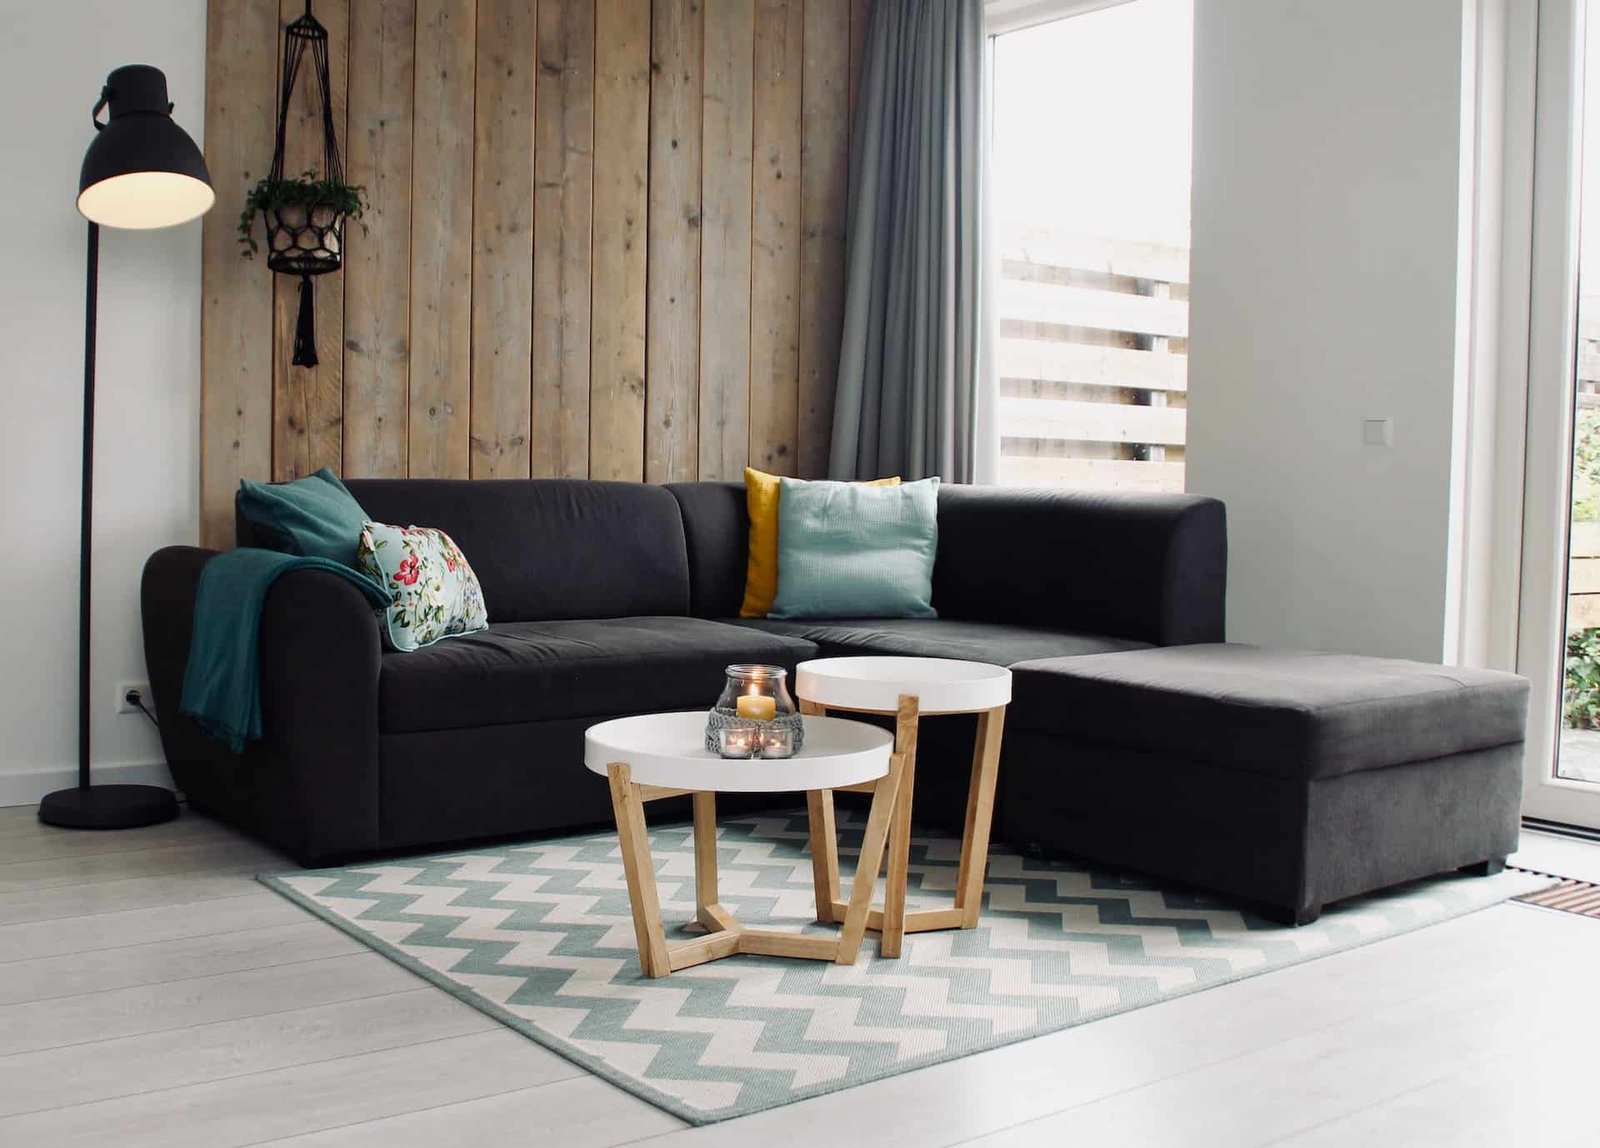 7 Tips – How to Find the Perfect Sofa for Your Family